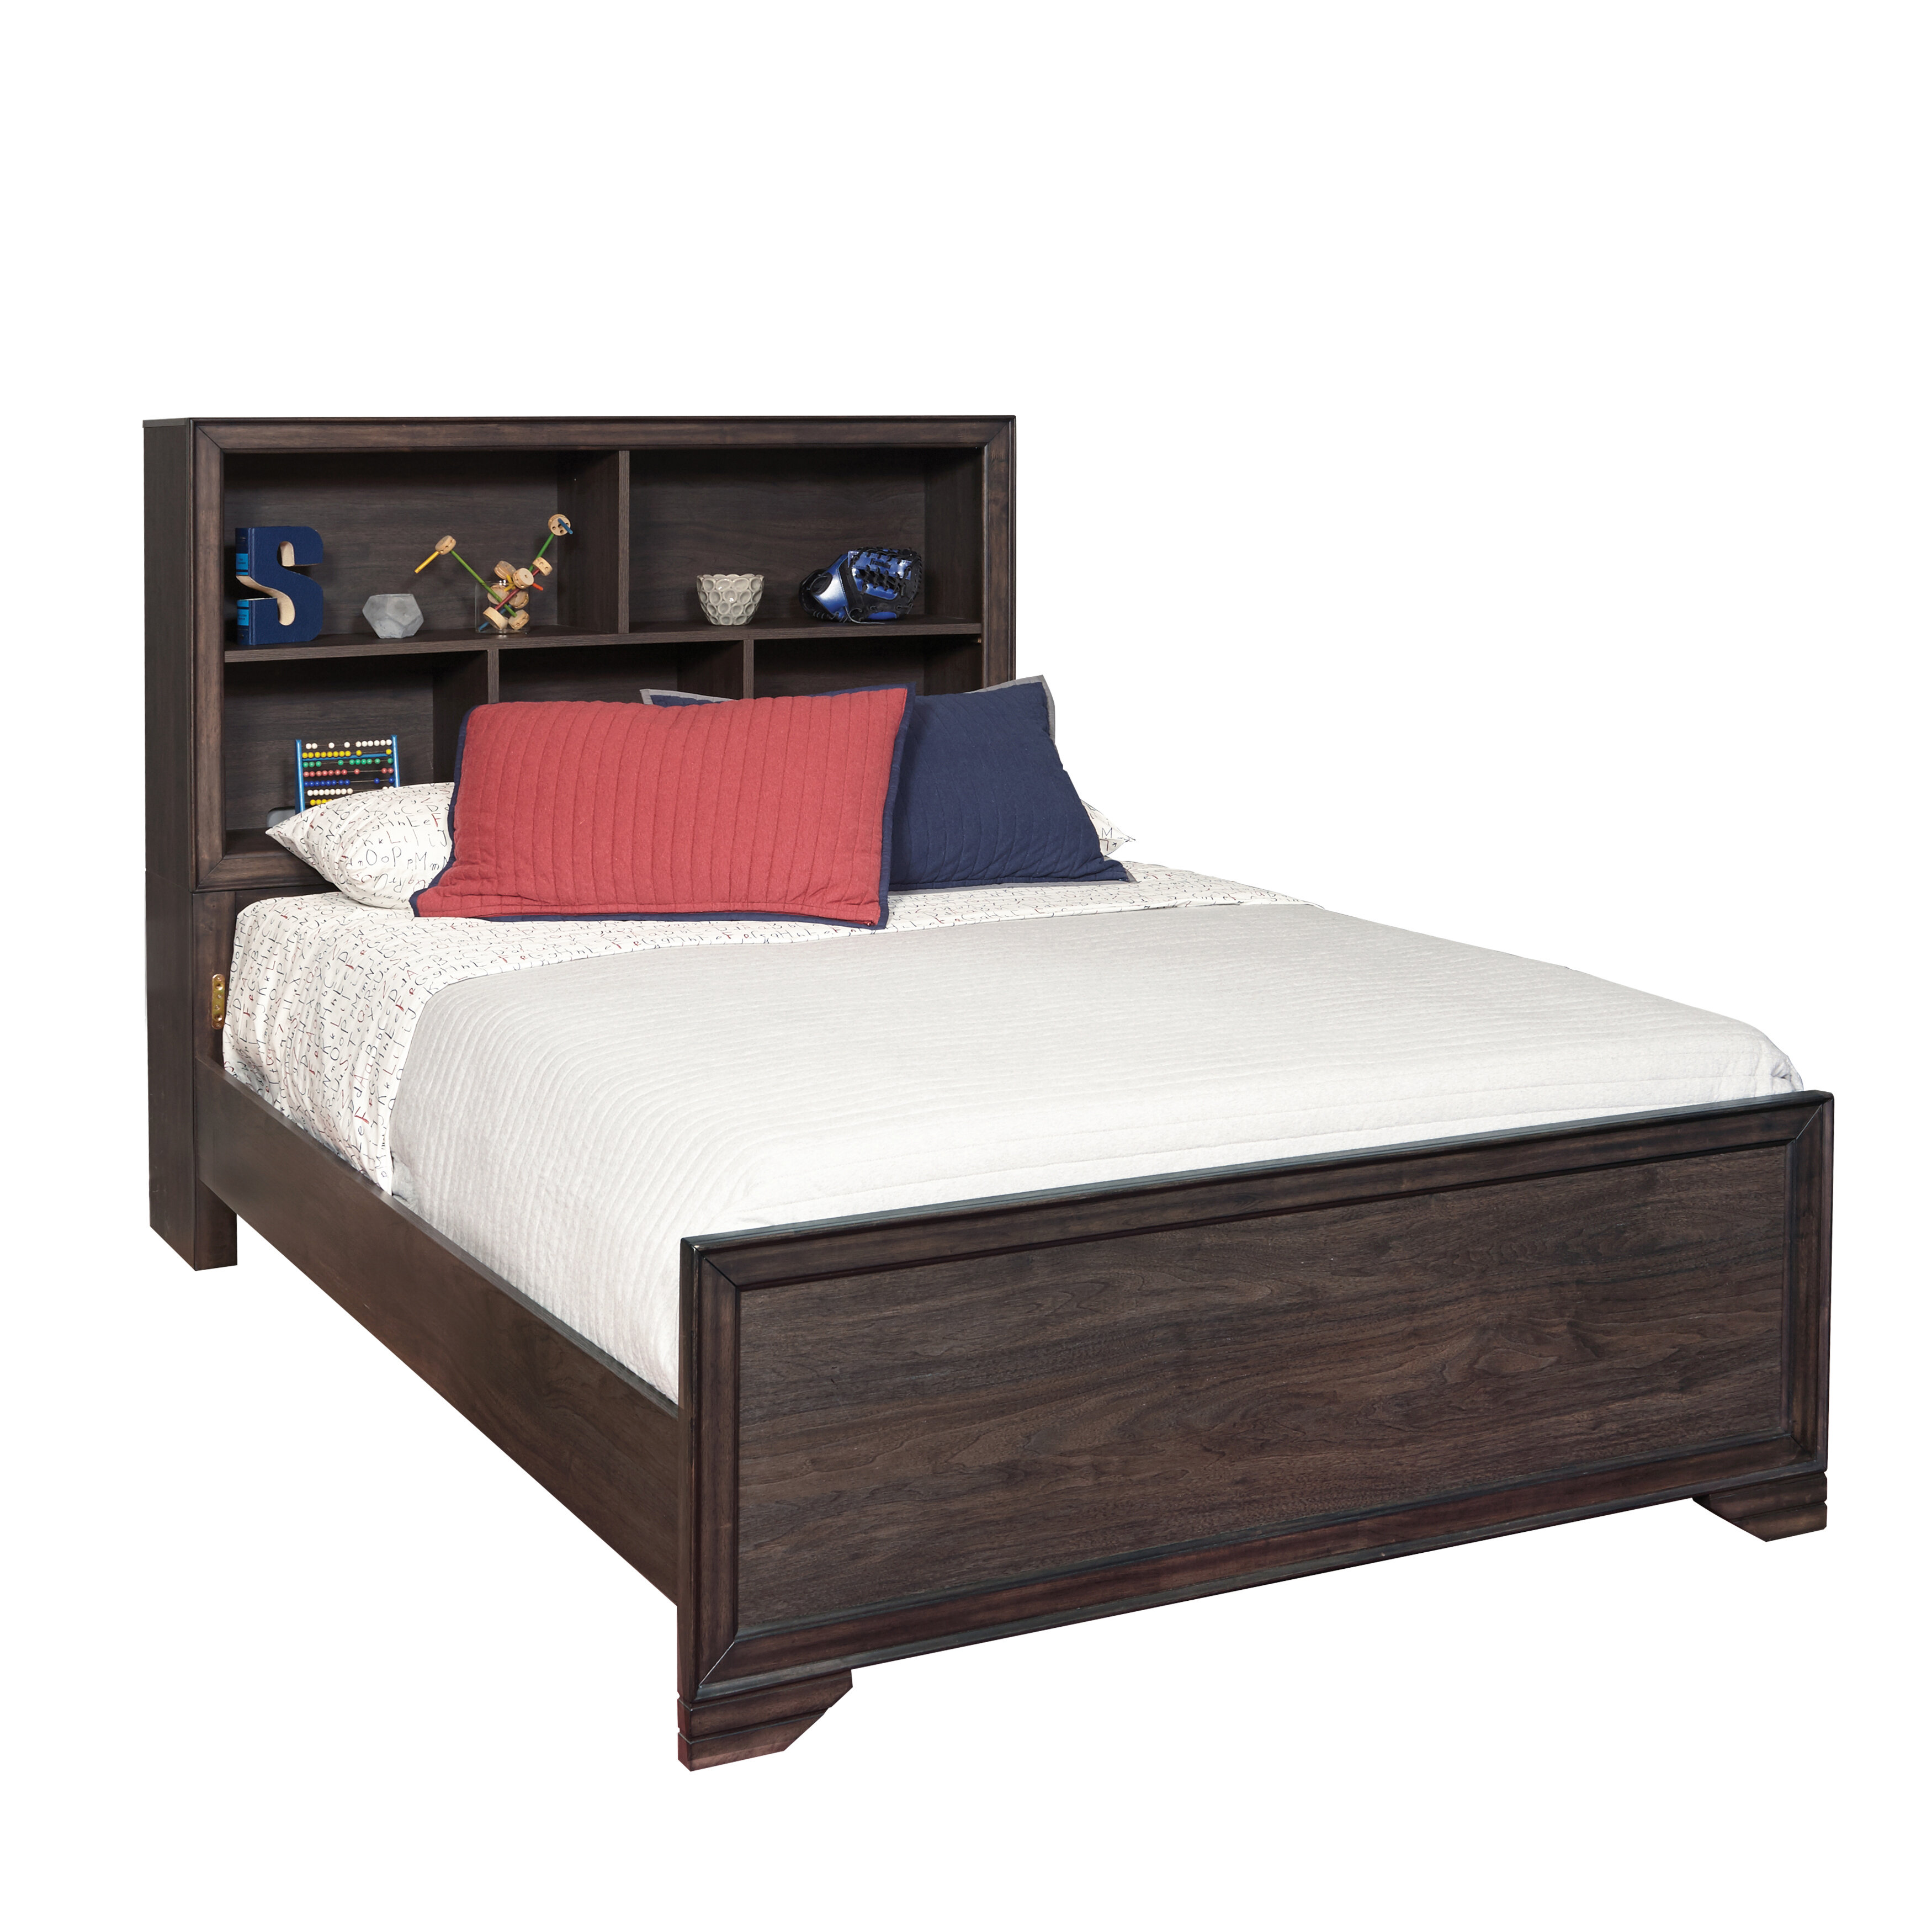 ikea twin bed with desk